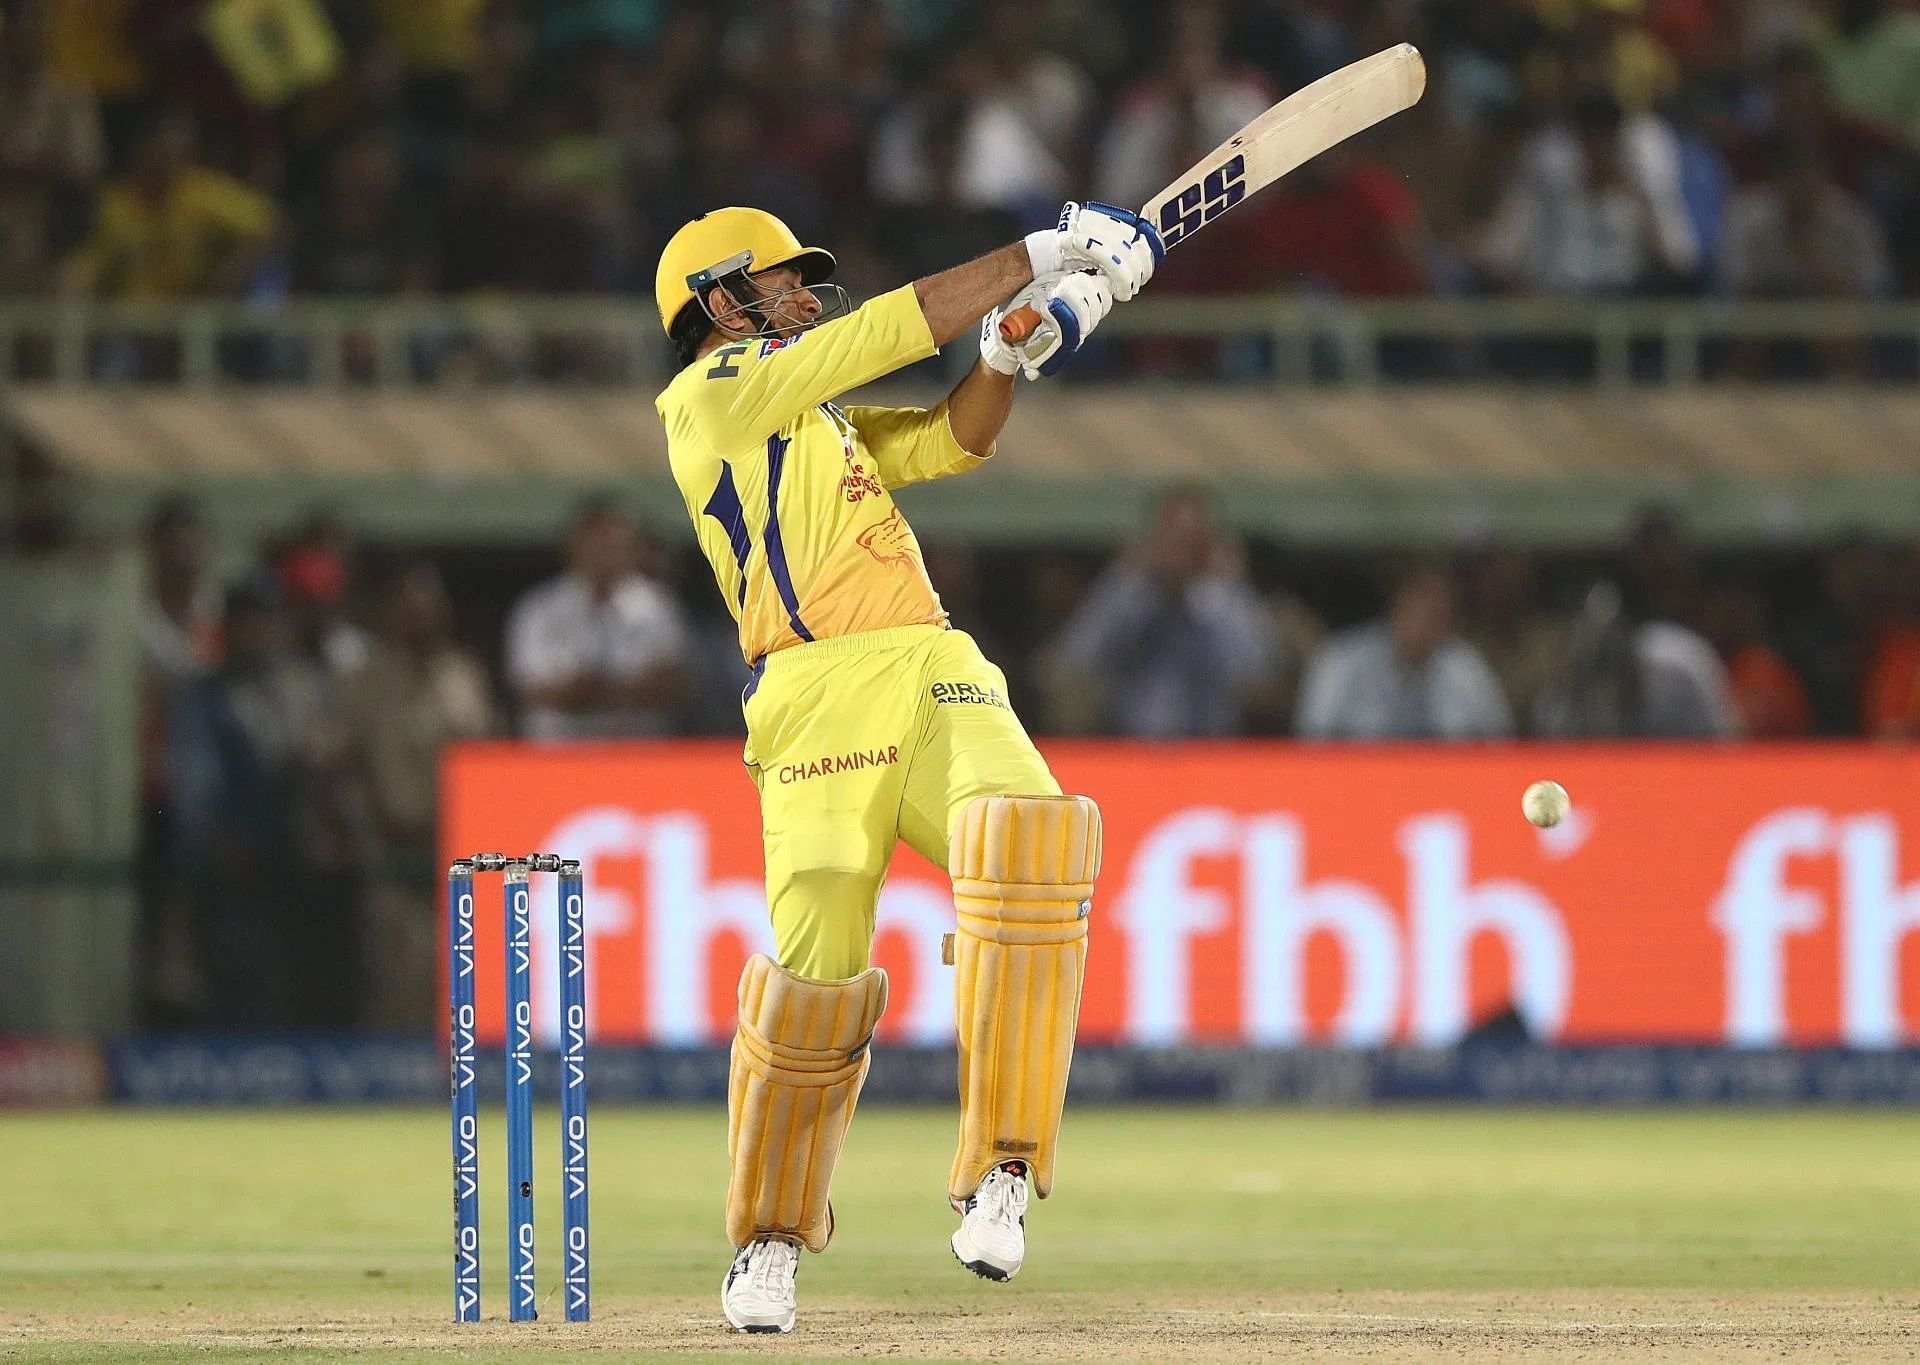 There is an injury cloud hanging over CSK captain MS Dhoni